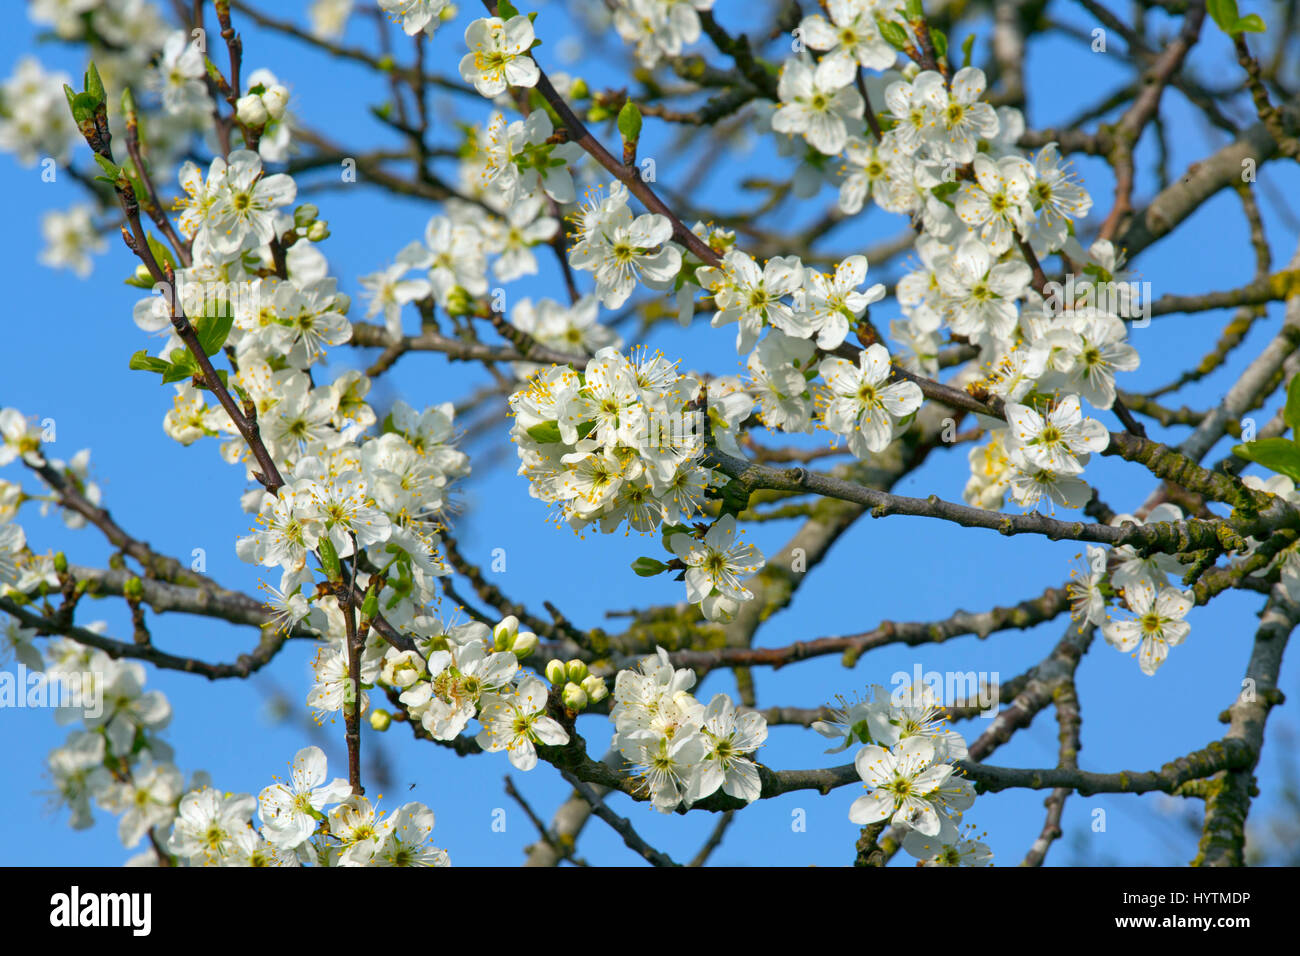 Conference Pear blossom cultivated from the European pear (Pyrus communis). Stock Photo